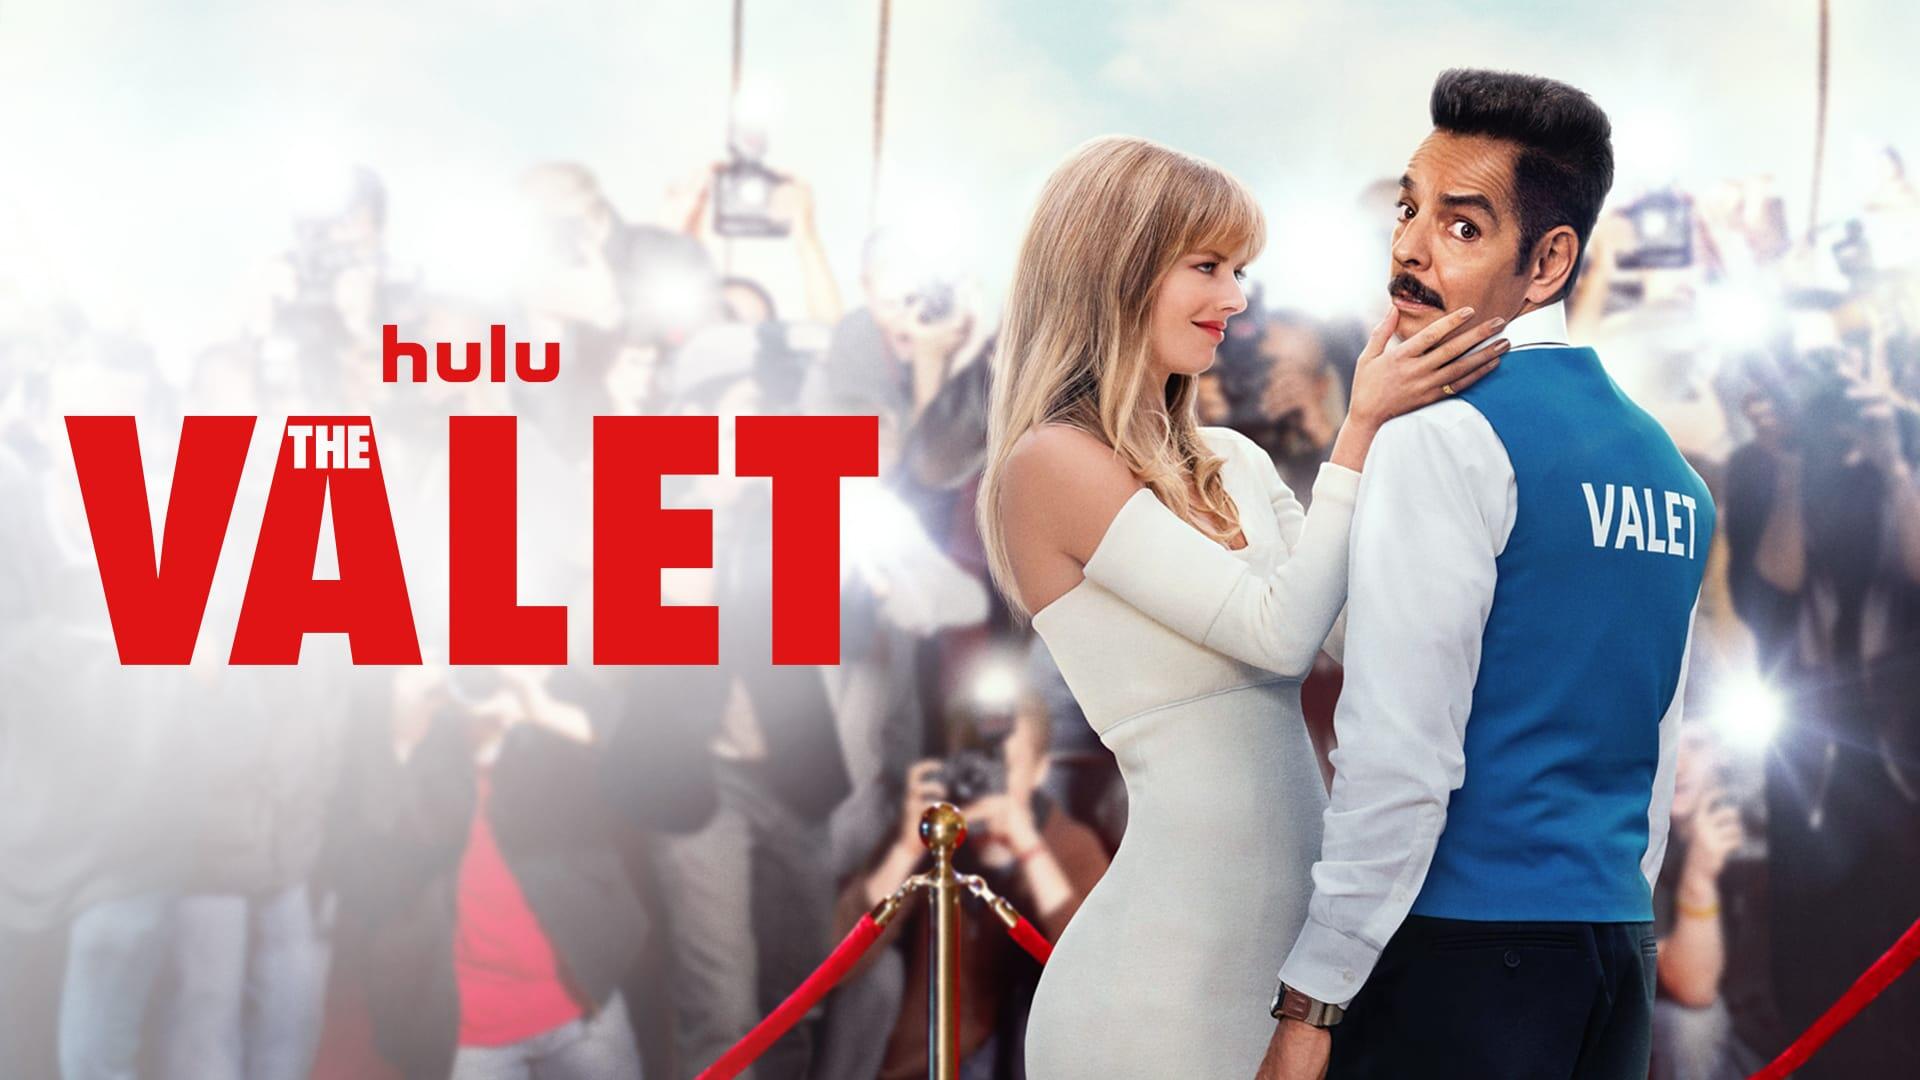 The Valet -- In “The Valet,” world famous movie star, Olivia (Samara Weaving) faces a PR disaster when a paparazzi snaps a photo of her with her married lover, Vincent (Max Greenfield). The hard-working valet Antonio (Eugenio Derbez) accidentally appears in the same photo and is enlisted to pose as Olivia’s new boyfriend as a cover up. This ruse with Olivia thrusts Antonio into the spotlight and unexpected chaos. In this fish out of water romantic comedy, two worlds and cultures collide as both Olivia and Antonio start to see themselves more clearly than ever before. “The Valet,” directed by Richard Wong and written by Rob Greenberg and Bob Fisher, is the English-language remake of the hit French film. Antonio (Eugenio Derbez) and Olivia (Samara Weaving), shown. (Courtesy of Hulu)